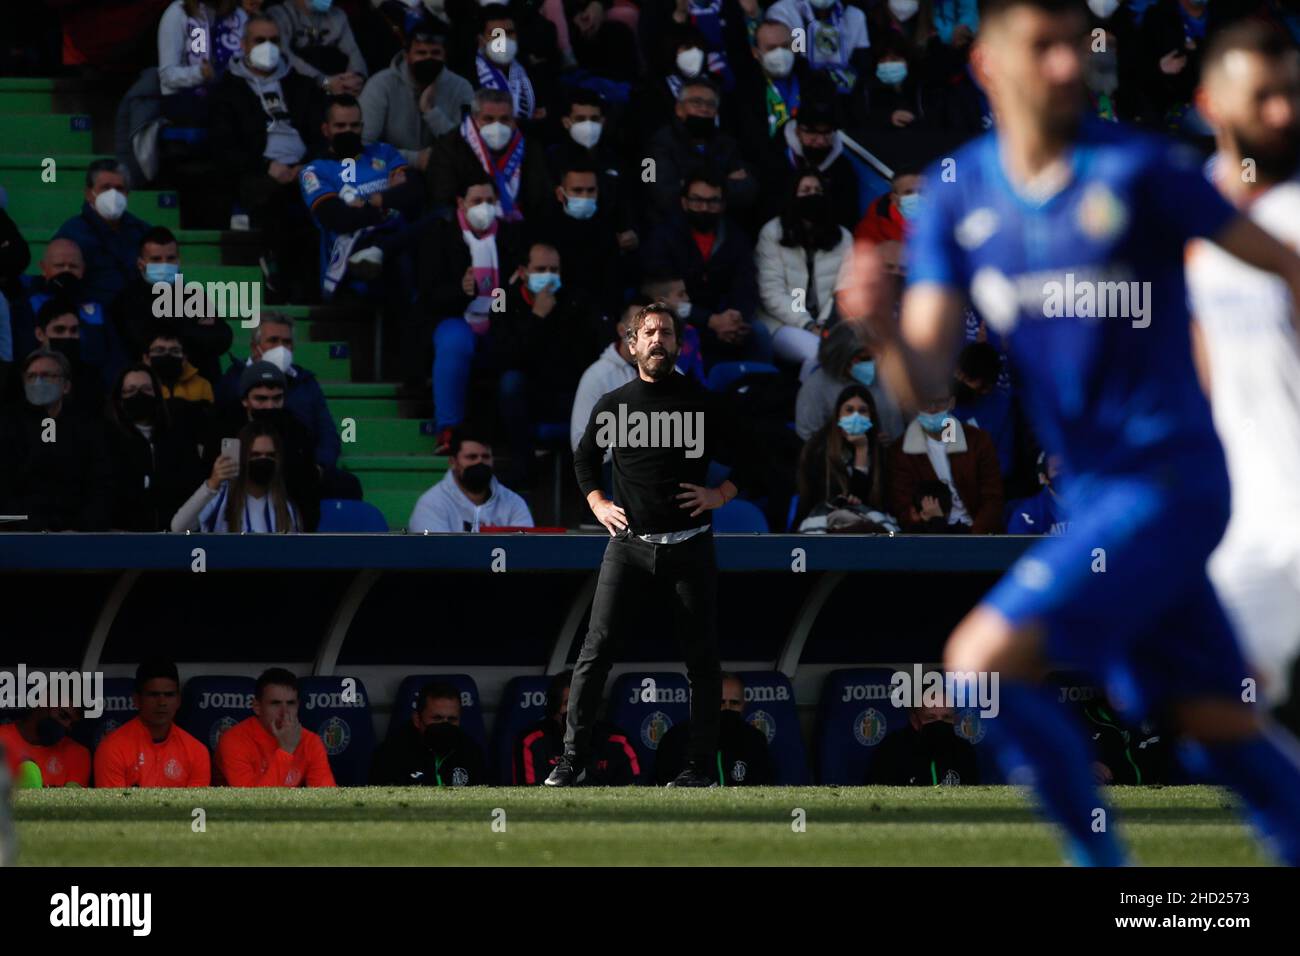 Madrid, Spain. 02nd Jan, 2022. Quique Sanchez Flores of Getafe CF during the La Liga match between Getafe CF and Real Madrid at Coliseum Alfonso Perez Stadium in Madrid, Spain. Credit: DAX Images/Alamy Live News Stock Photo